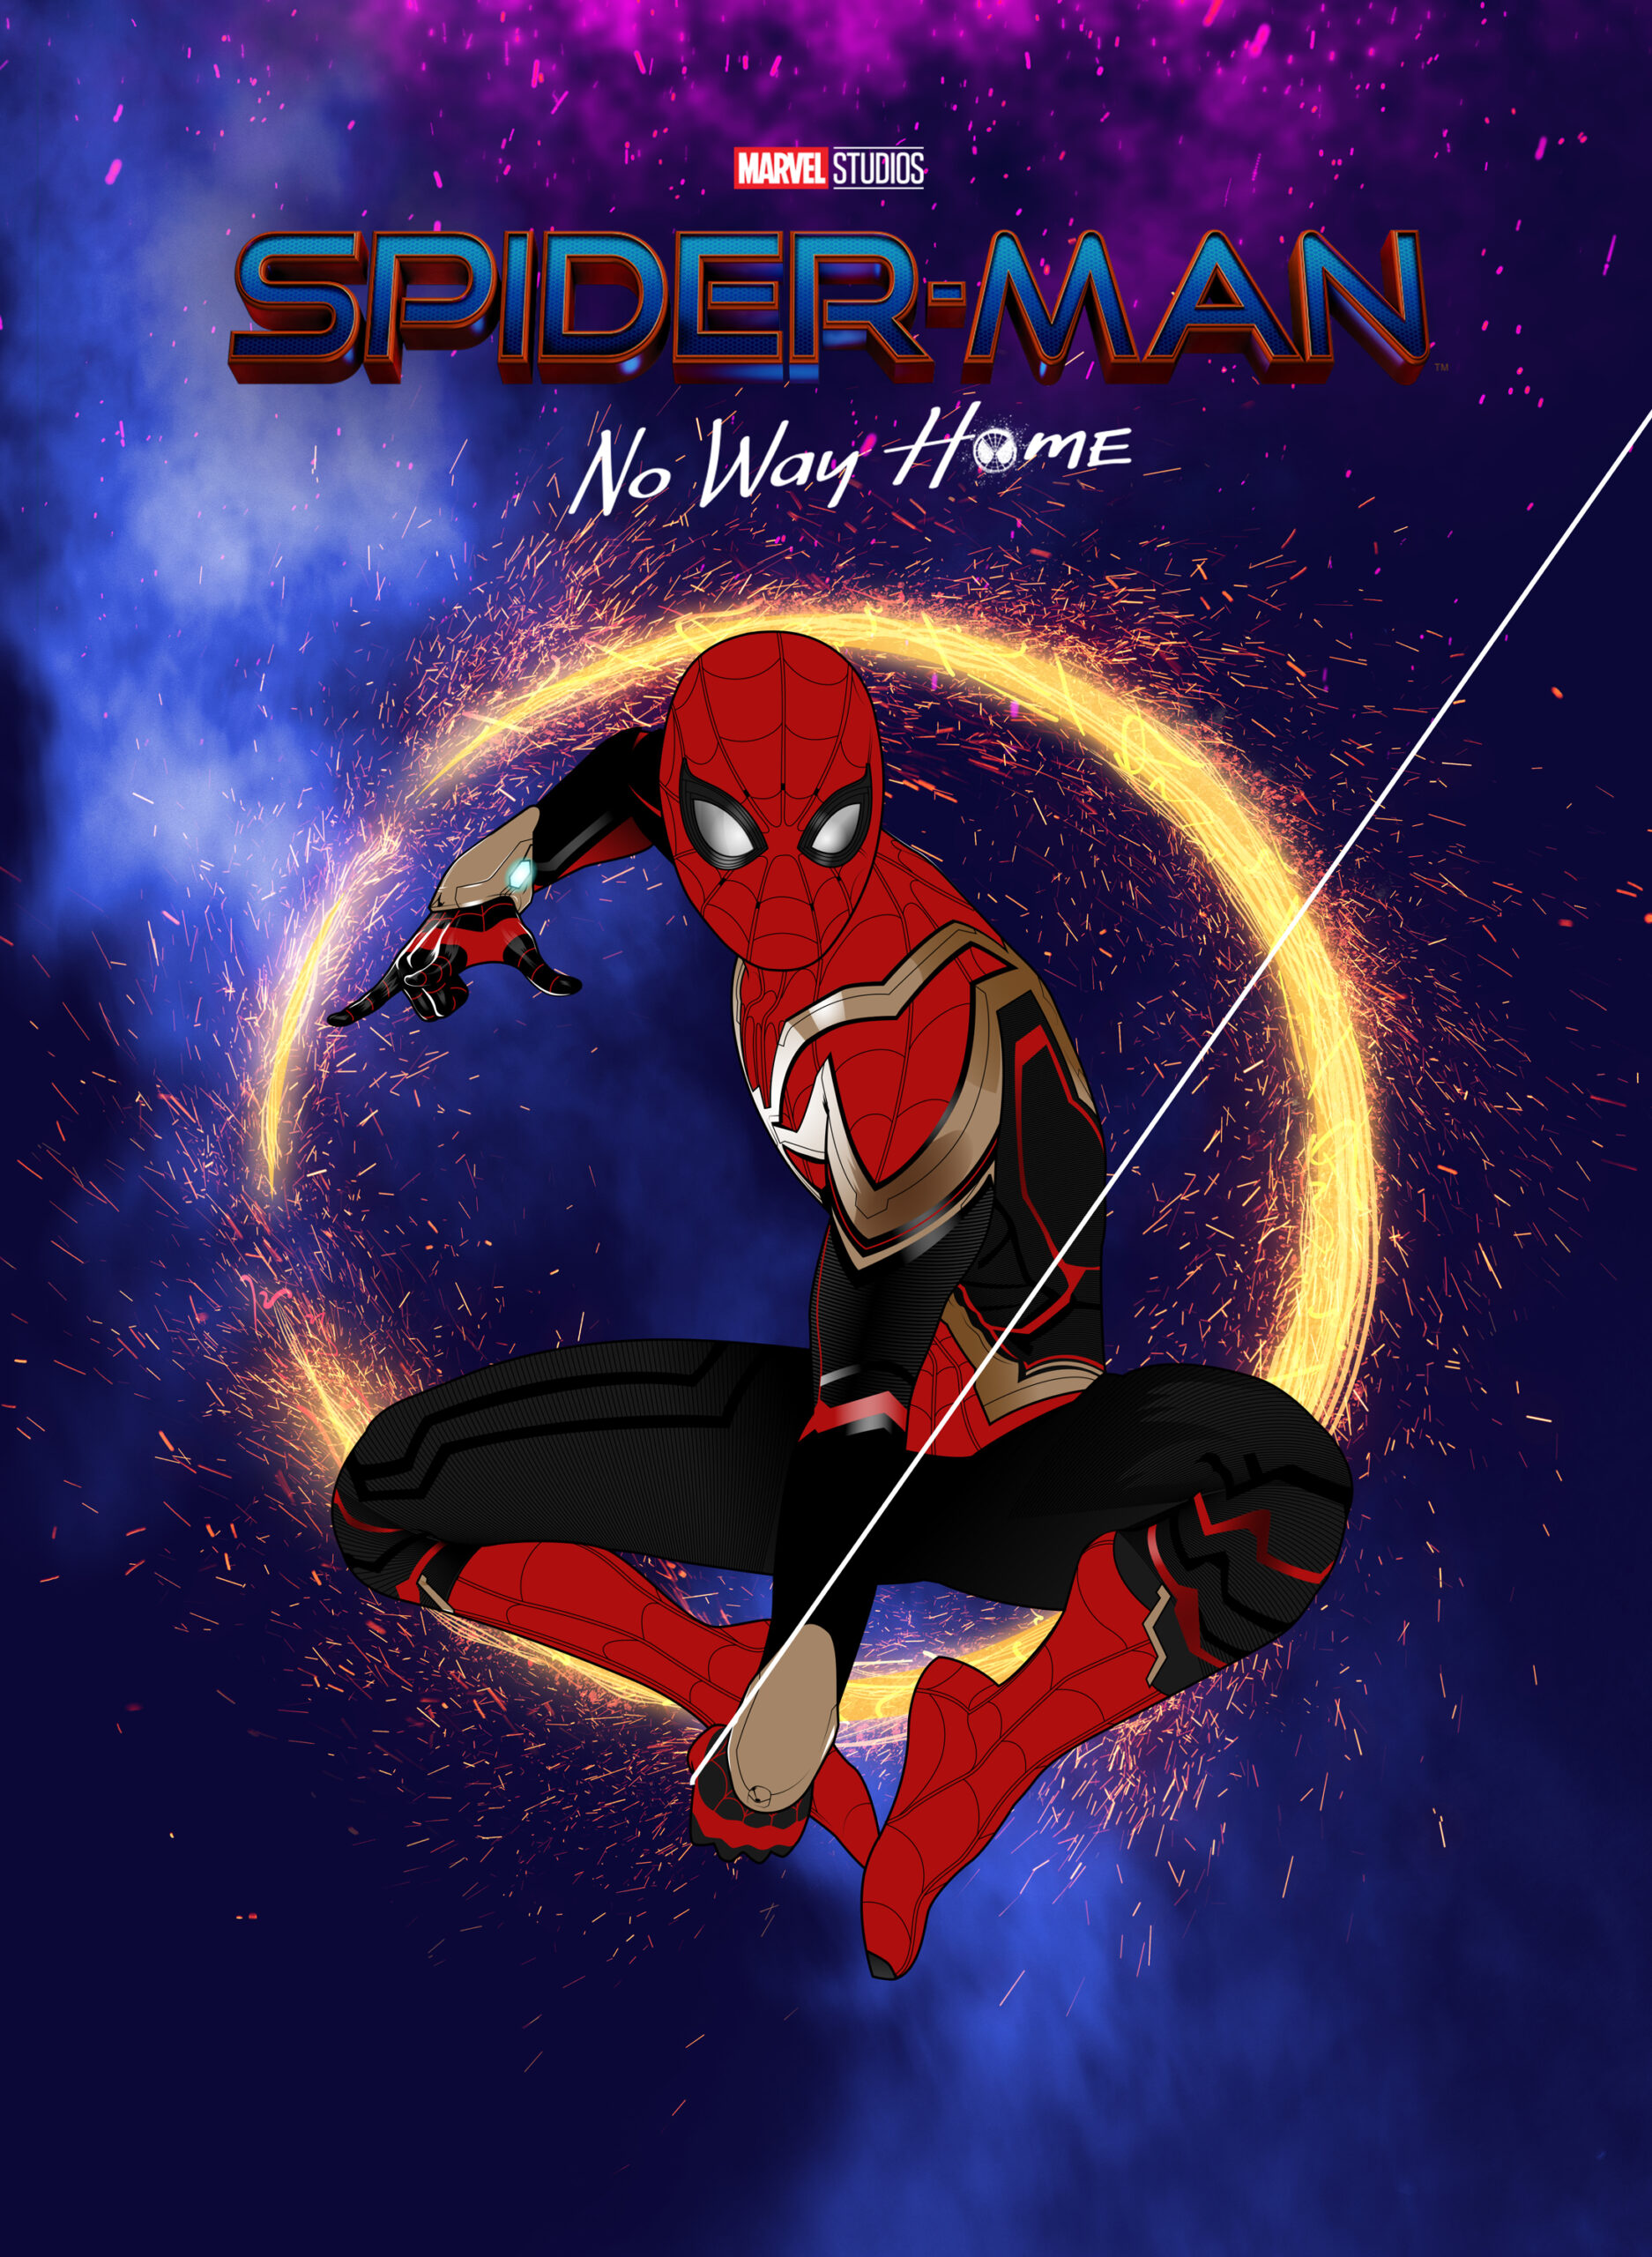 Official Sony Home Entertainment - Spiderman No Way Home